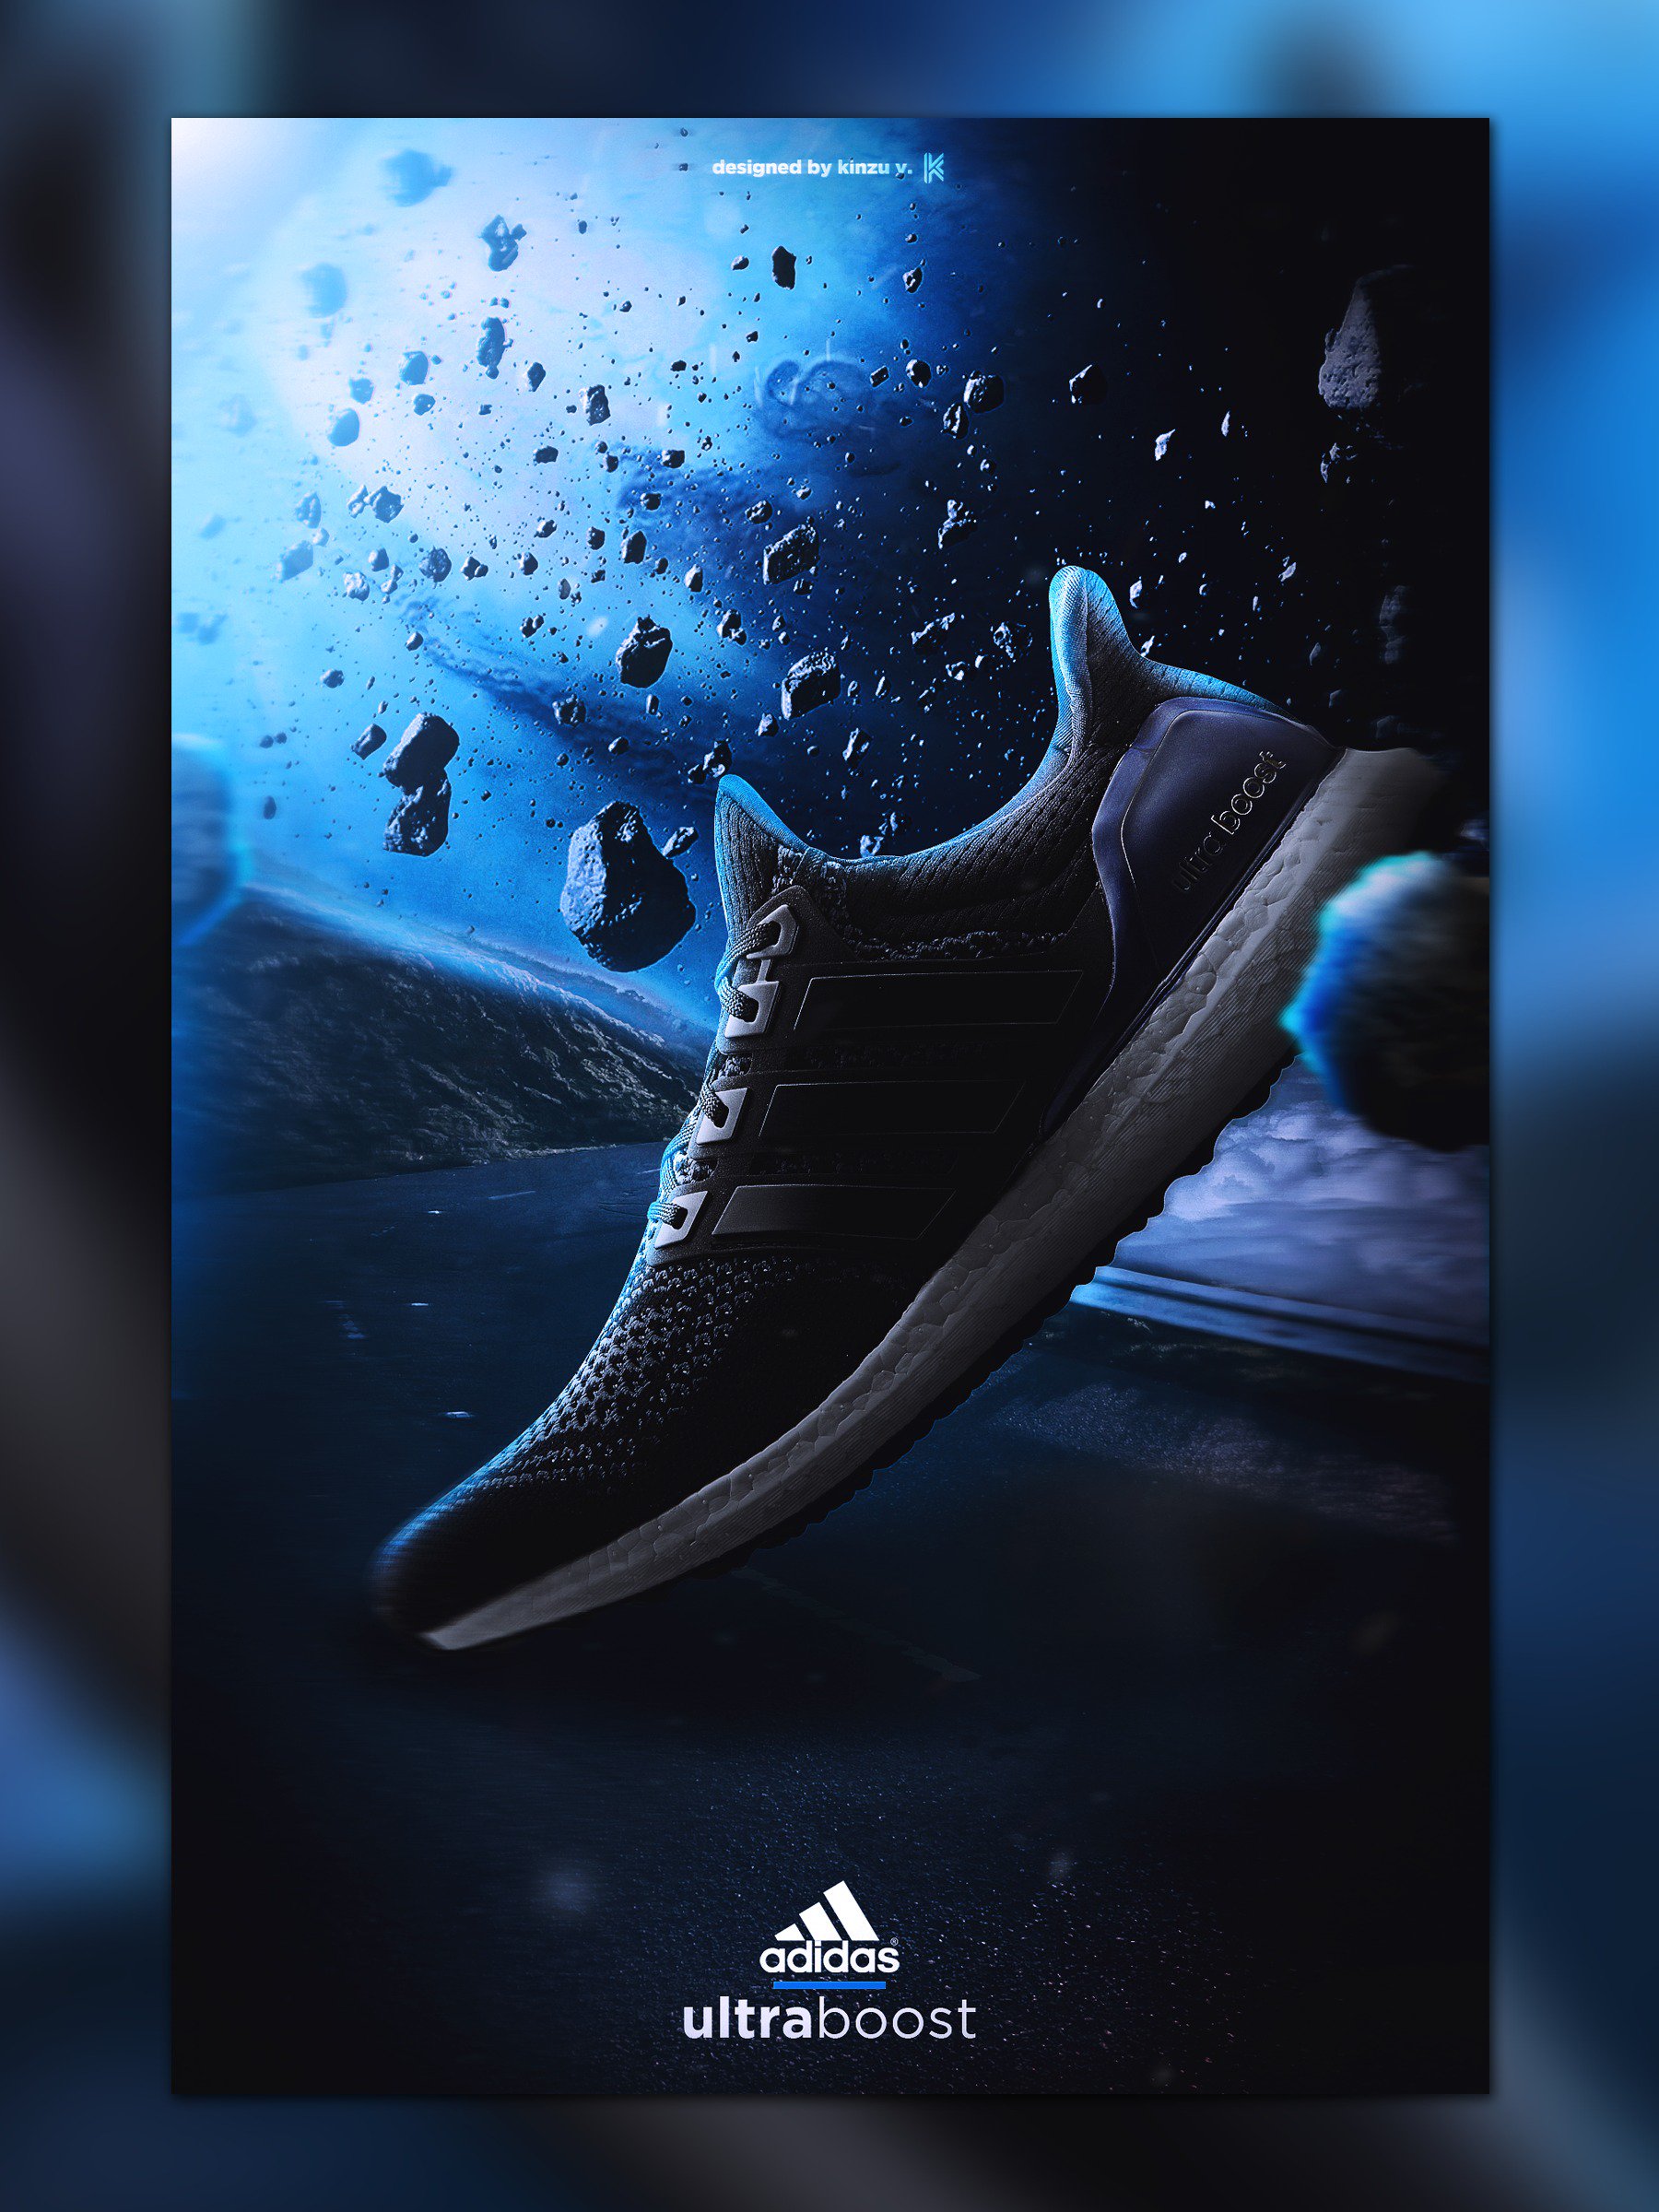 KINZU YEO Twitter: ".@adidas Ultra Boost Advertisement! Let me know what you think!